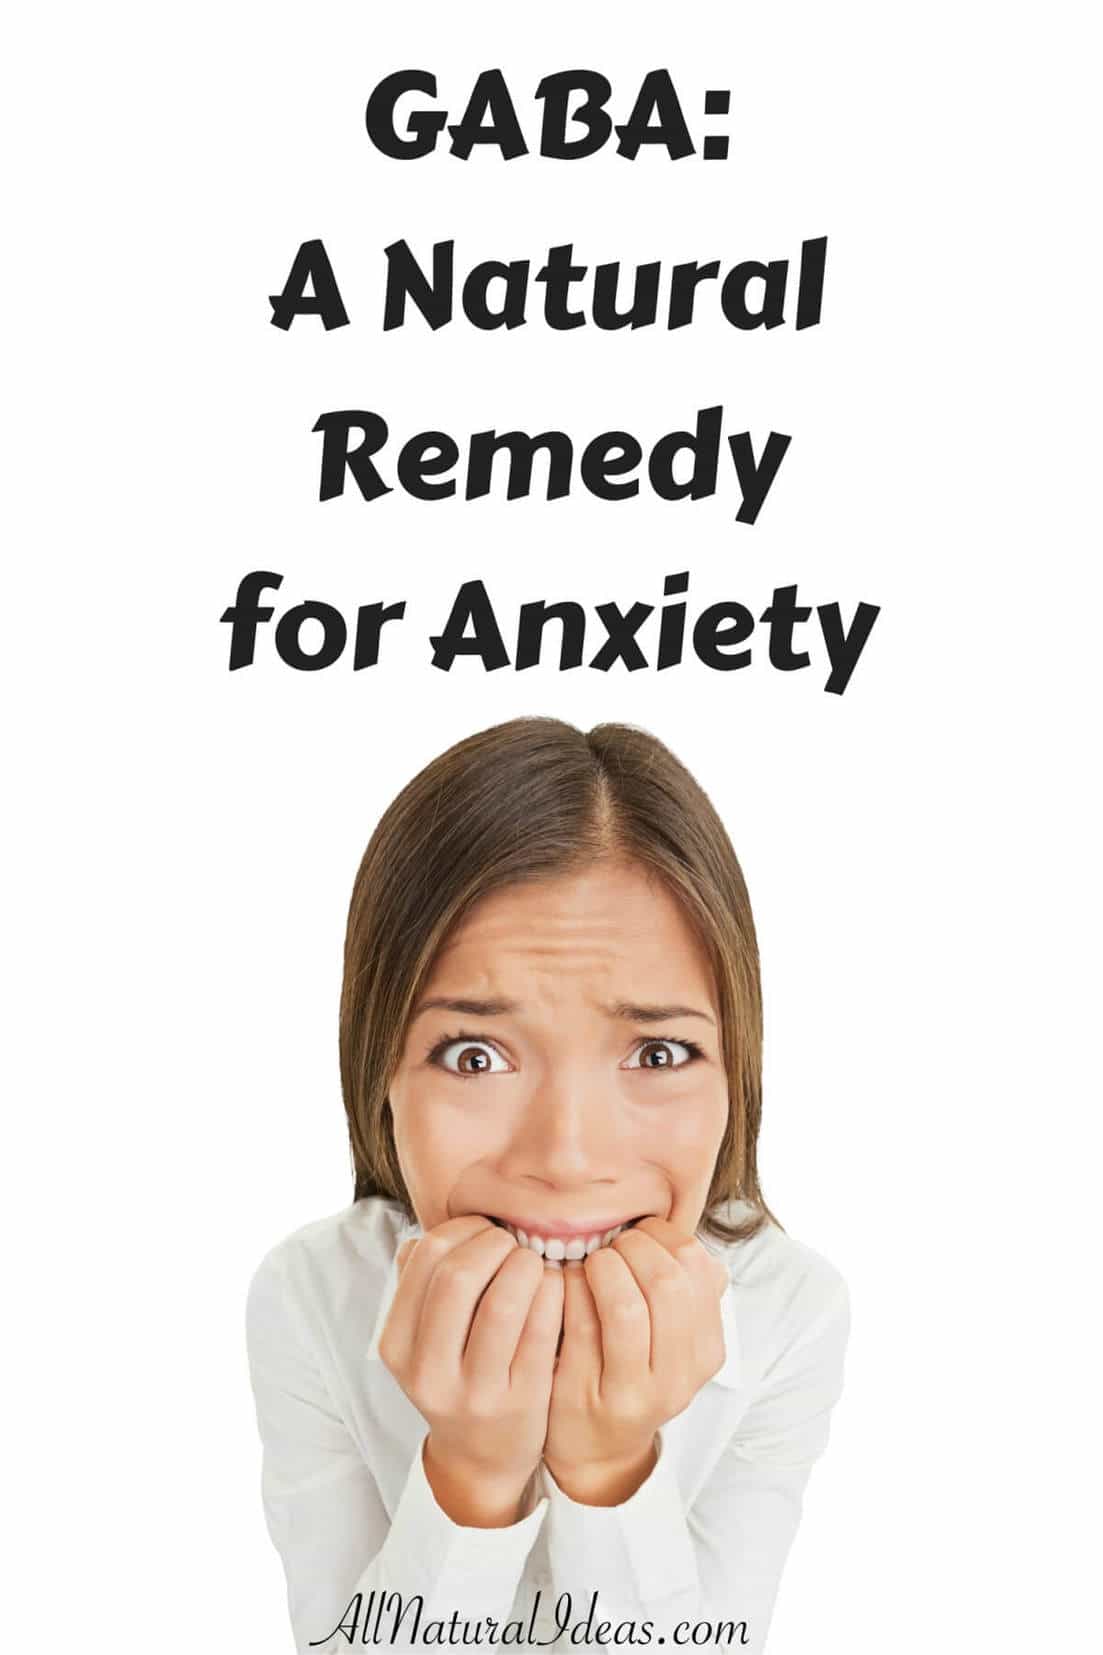 Many use GABA supplements as a natural anxiety remedy. GABA has been clinically proven to reduce anxiety and may also help improve diabetes and blood sugar.